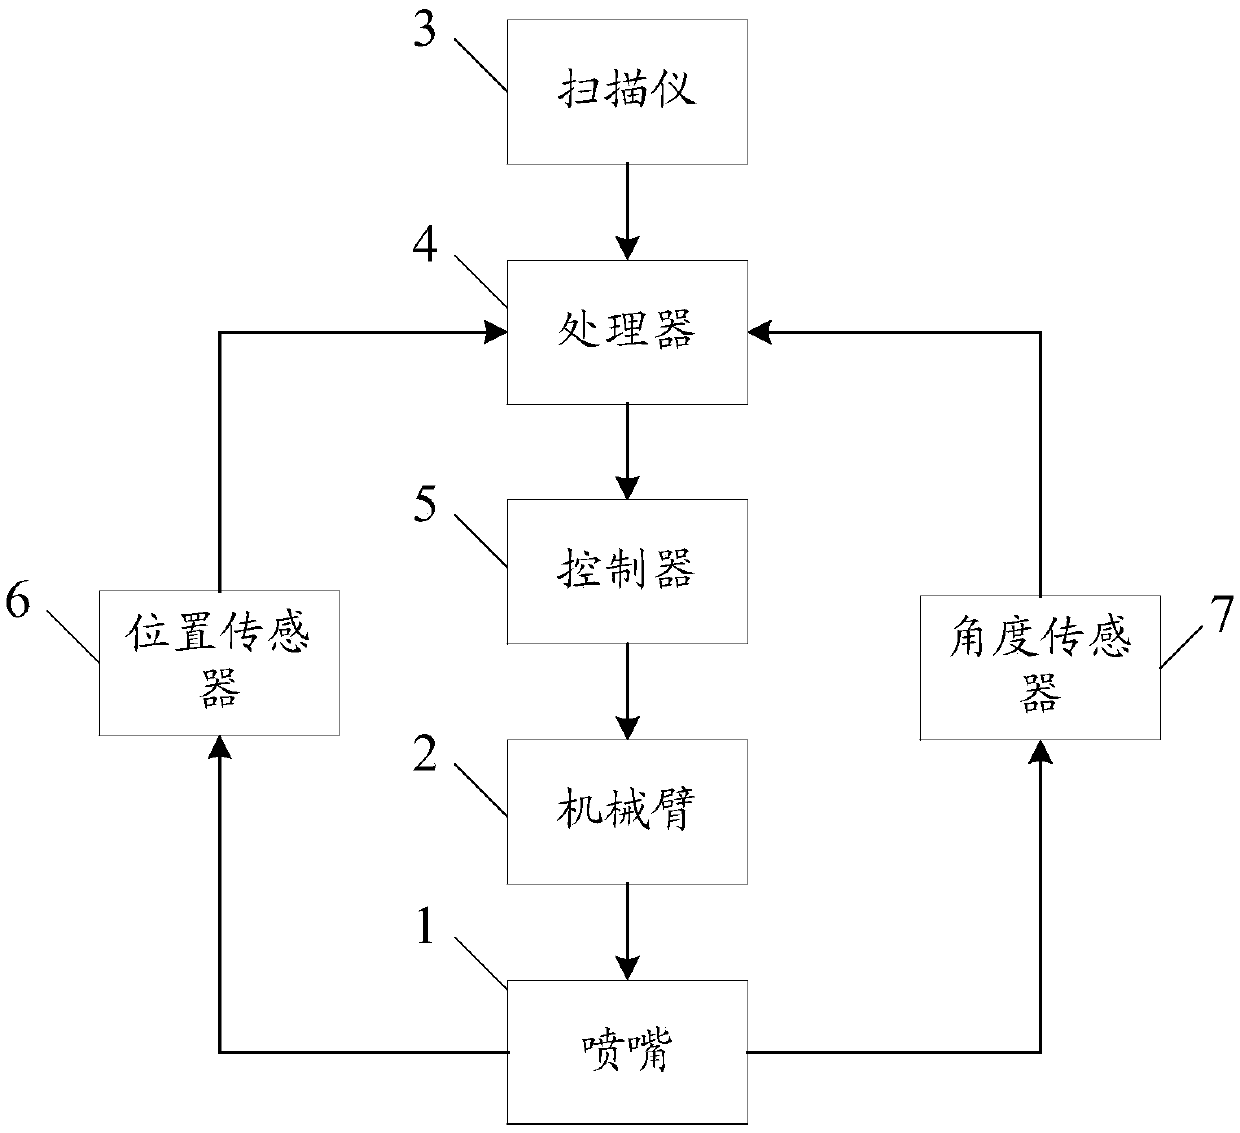 Full-automatic wet spraying control method and full-automatic wet spraying system